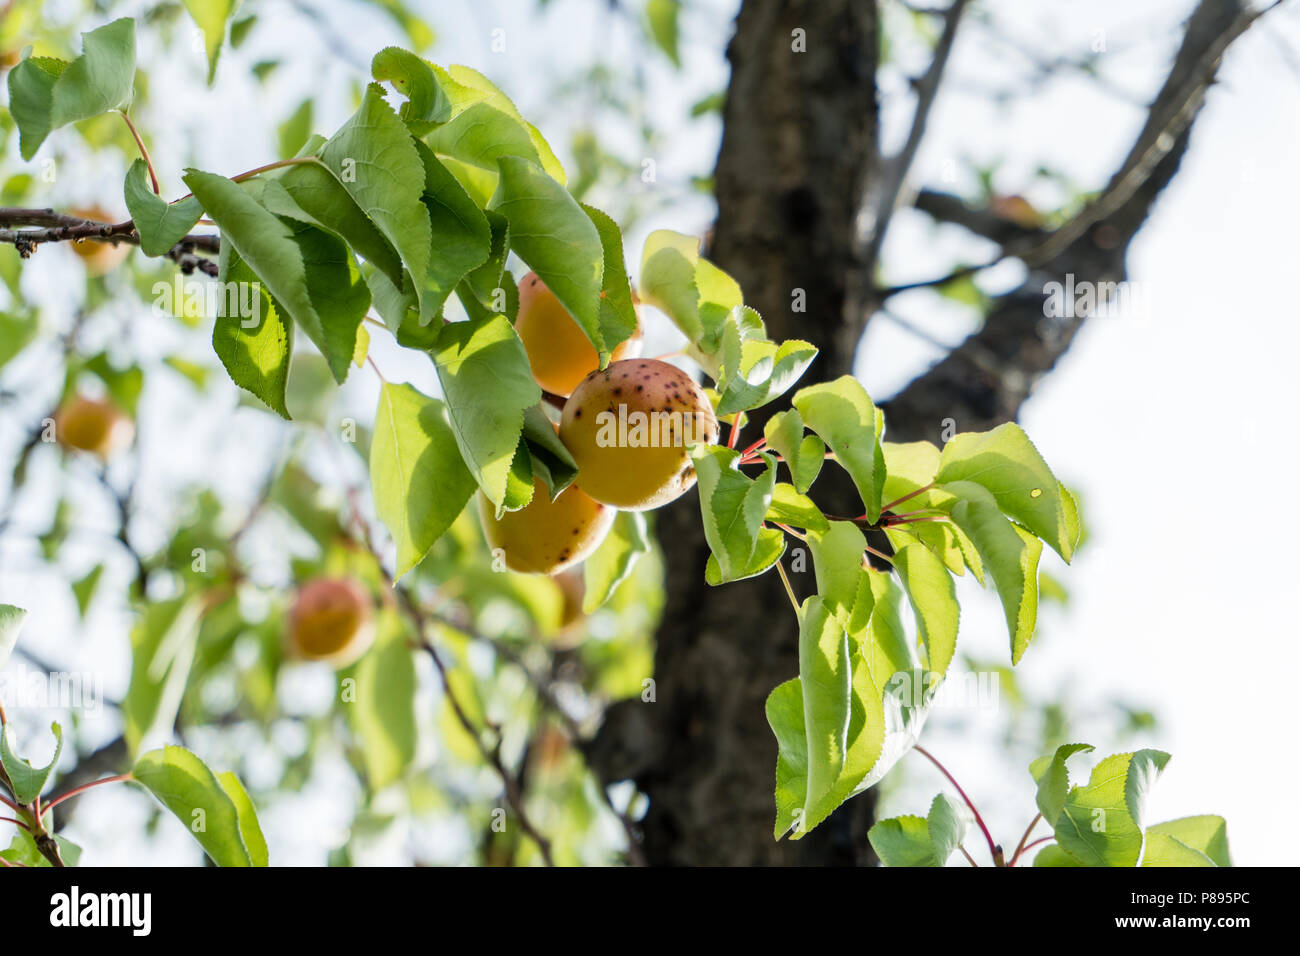 Branch of an apricot tree with ripe fruits against solid blue sky in summer. Stock Photo